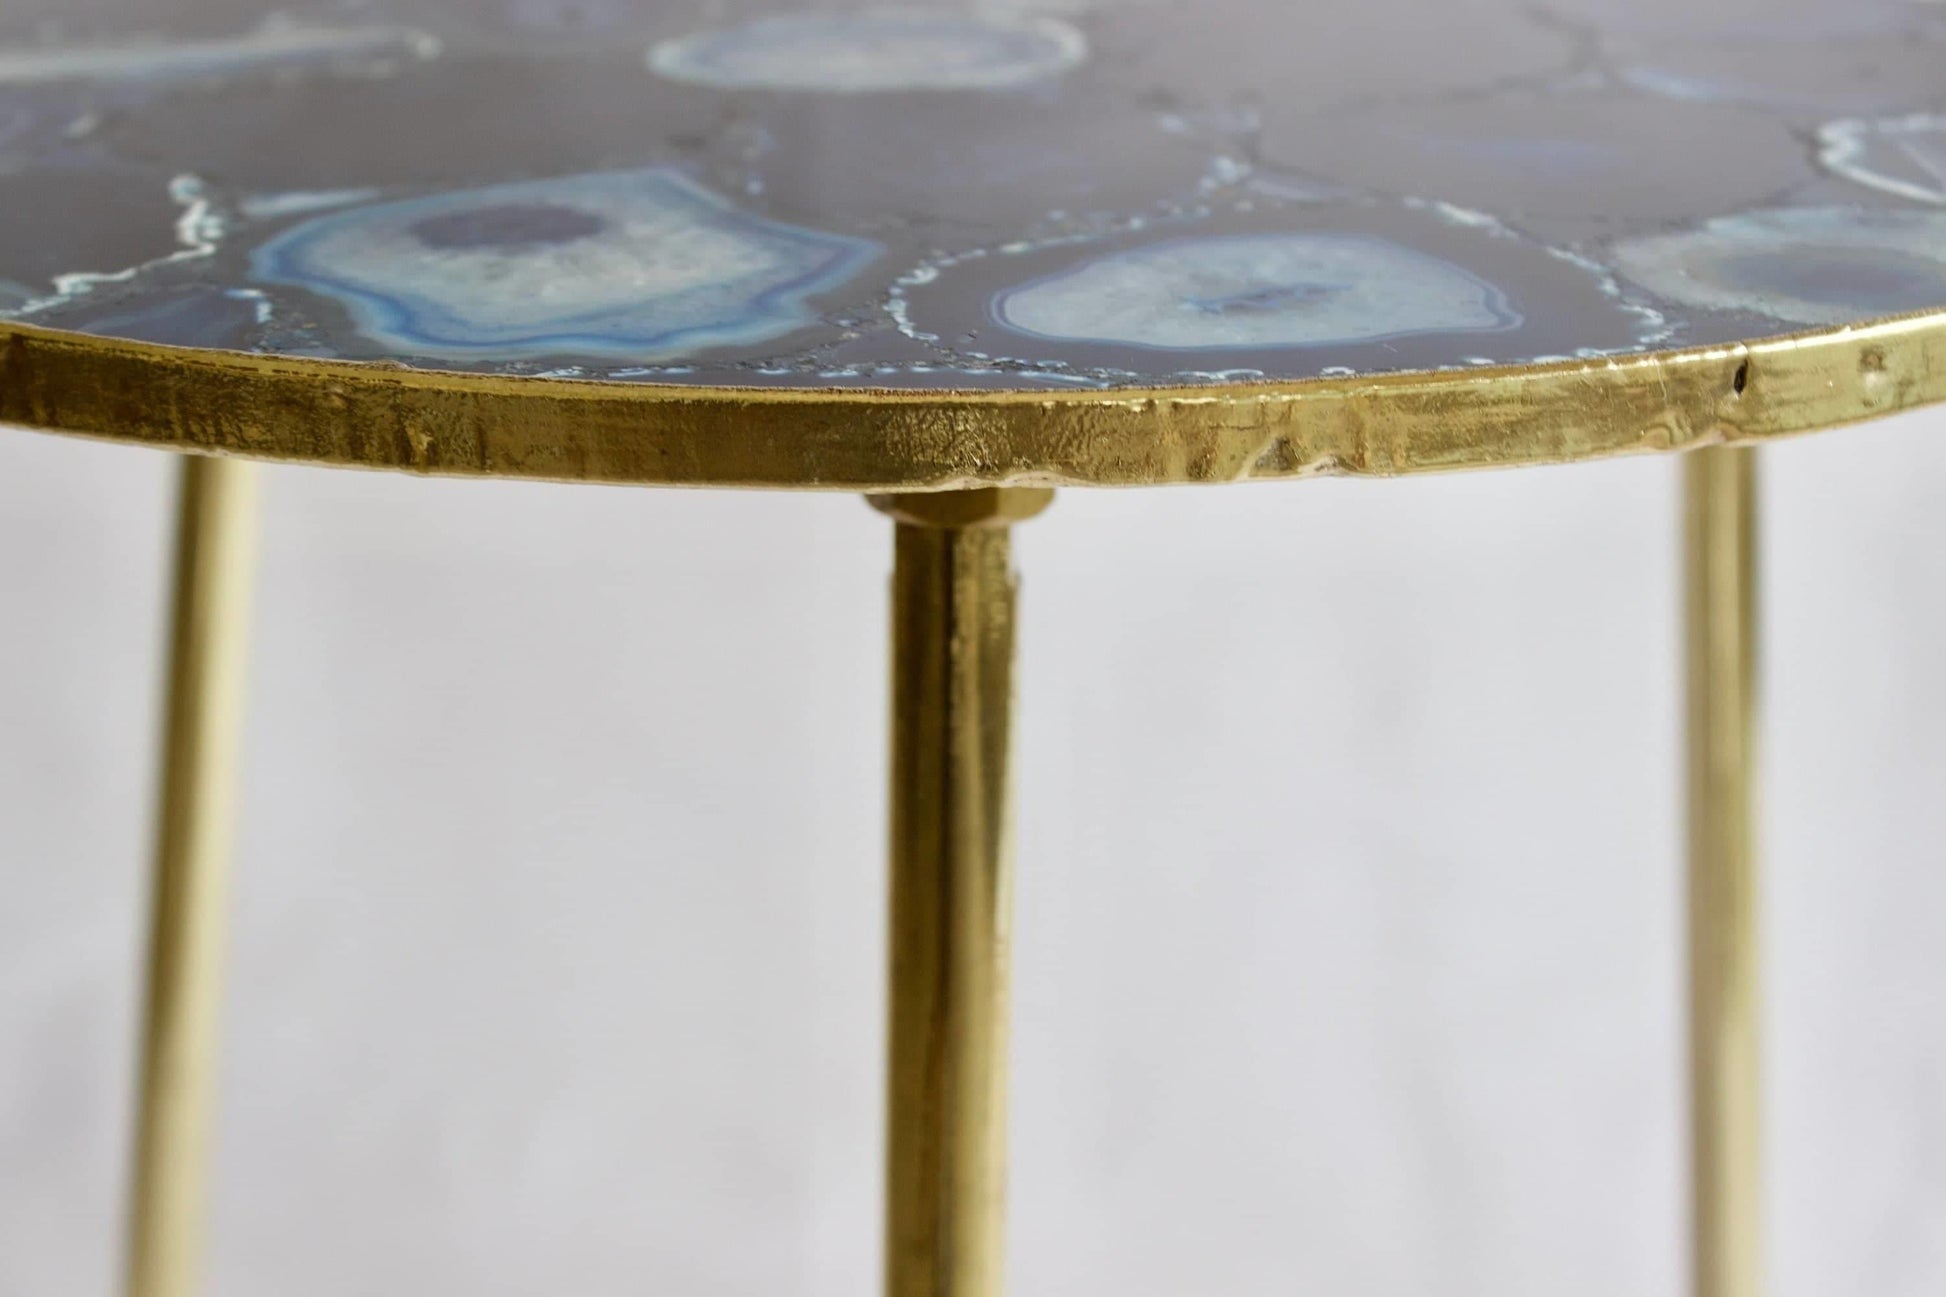 Blue Agate Round Coffee Side Table - MAIA HOMES